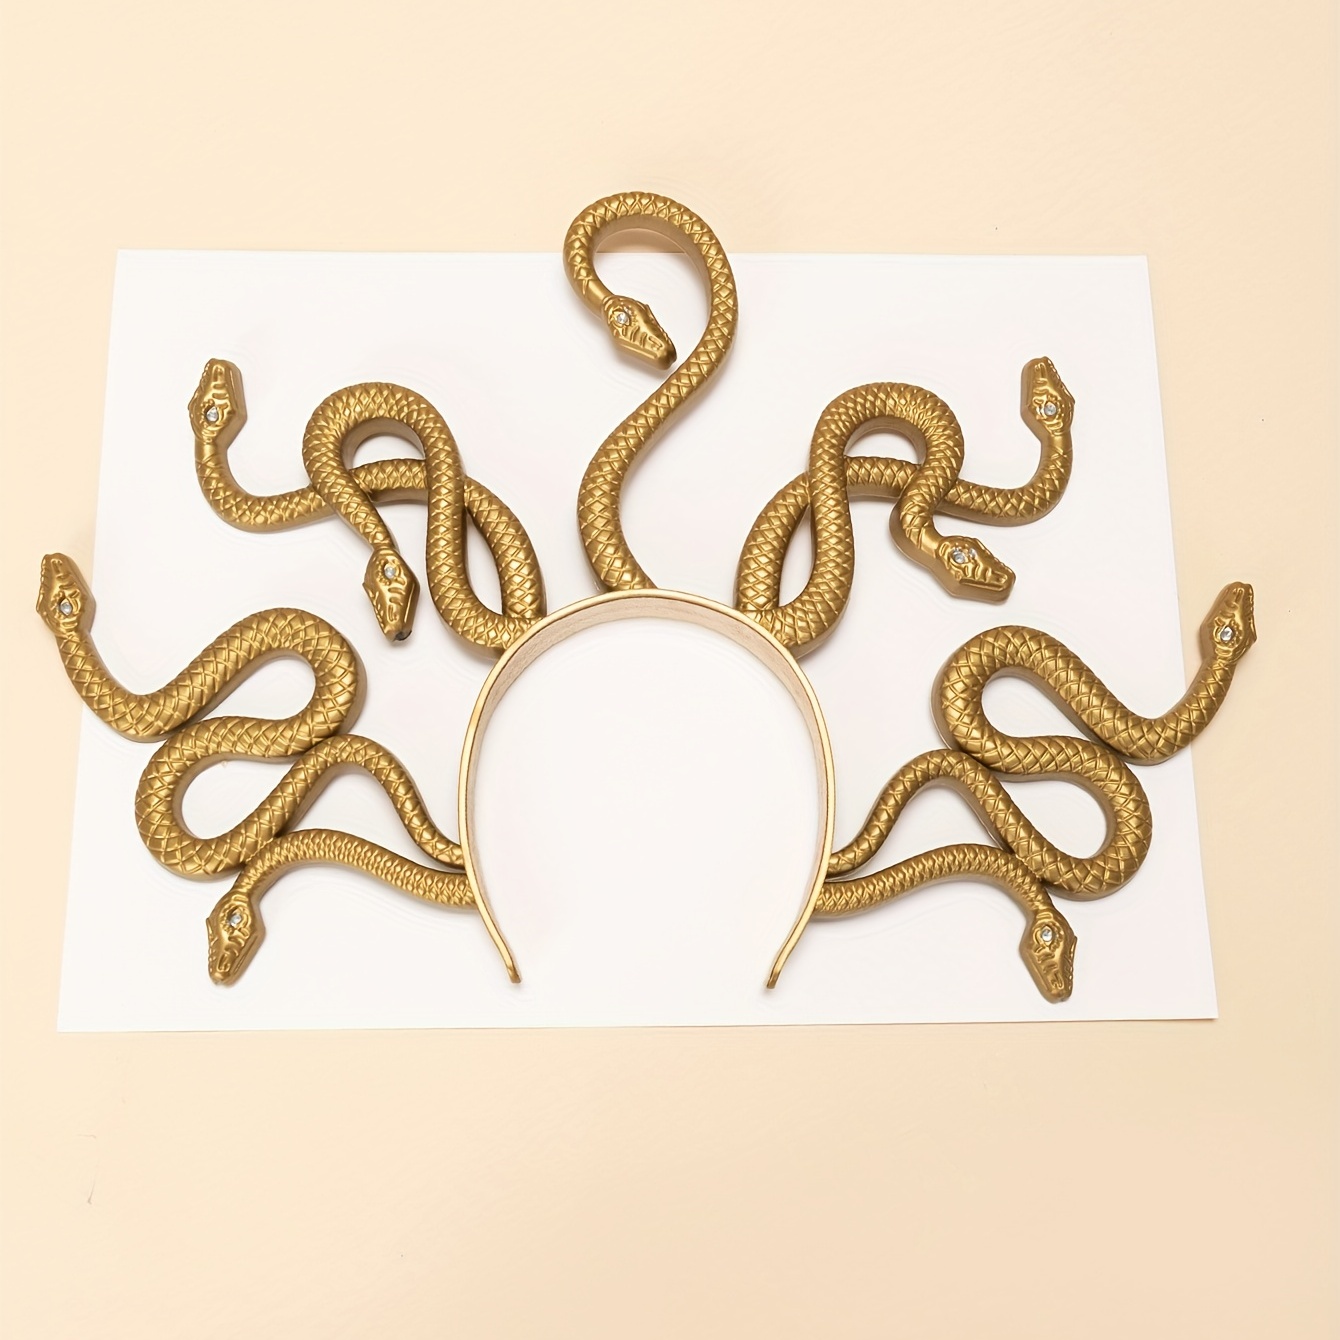 Golden Medusa Exaggerated Snake Head Hoop Dress Up Costume & Accessories  Costume Props